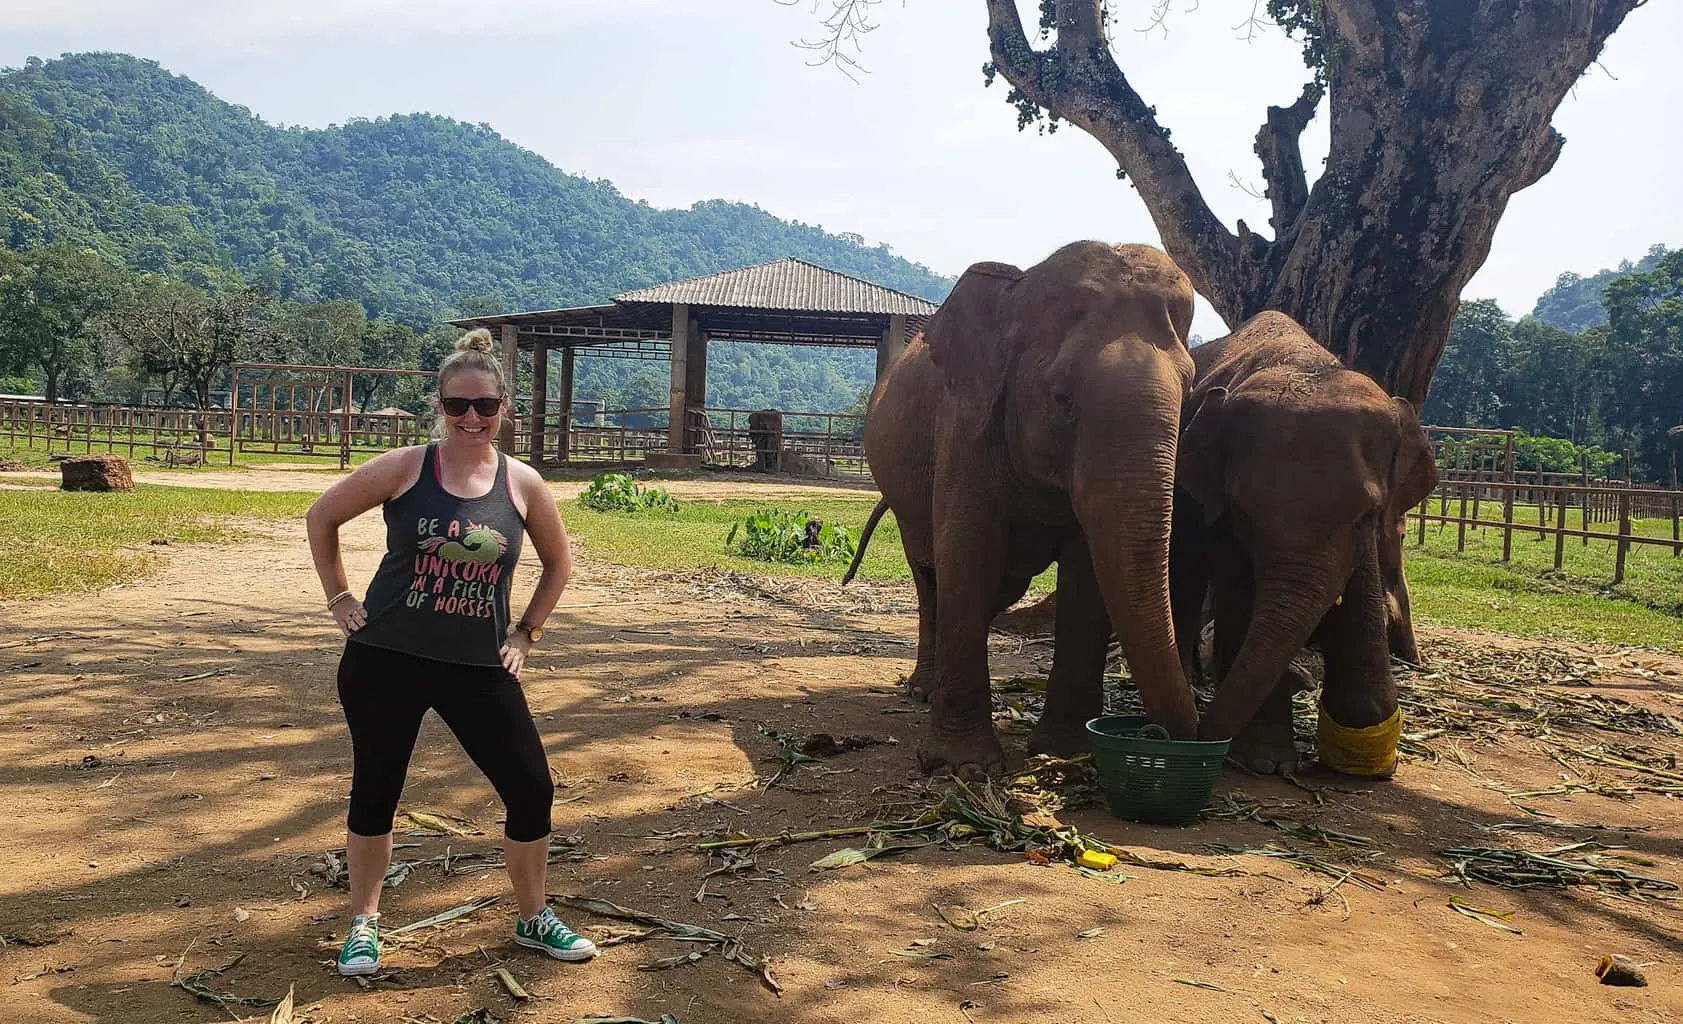 Hanging out with some of my favorite Elephant friends at Elephant Nature Park in Chiang Mai, Thailand.